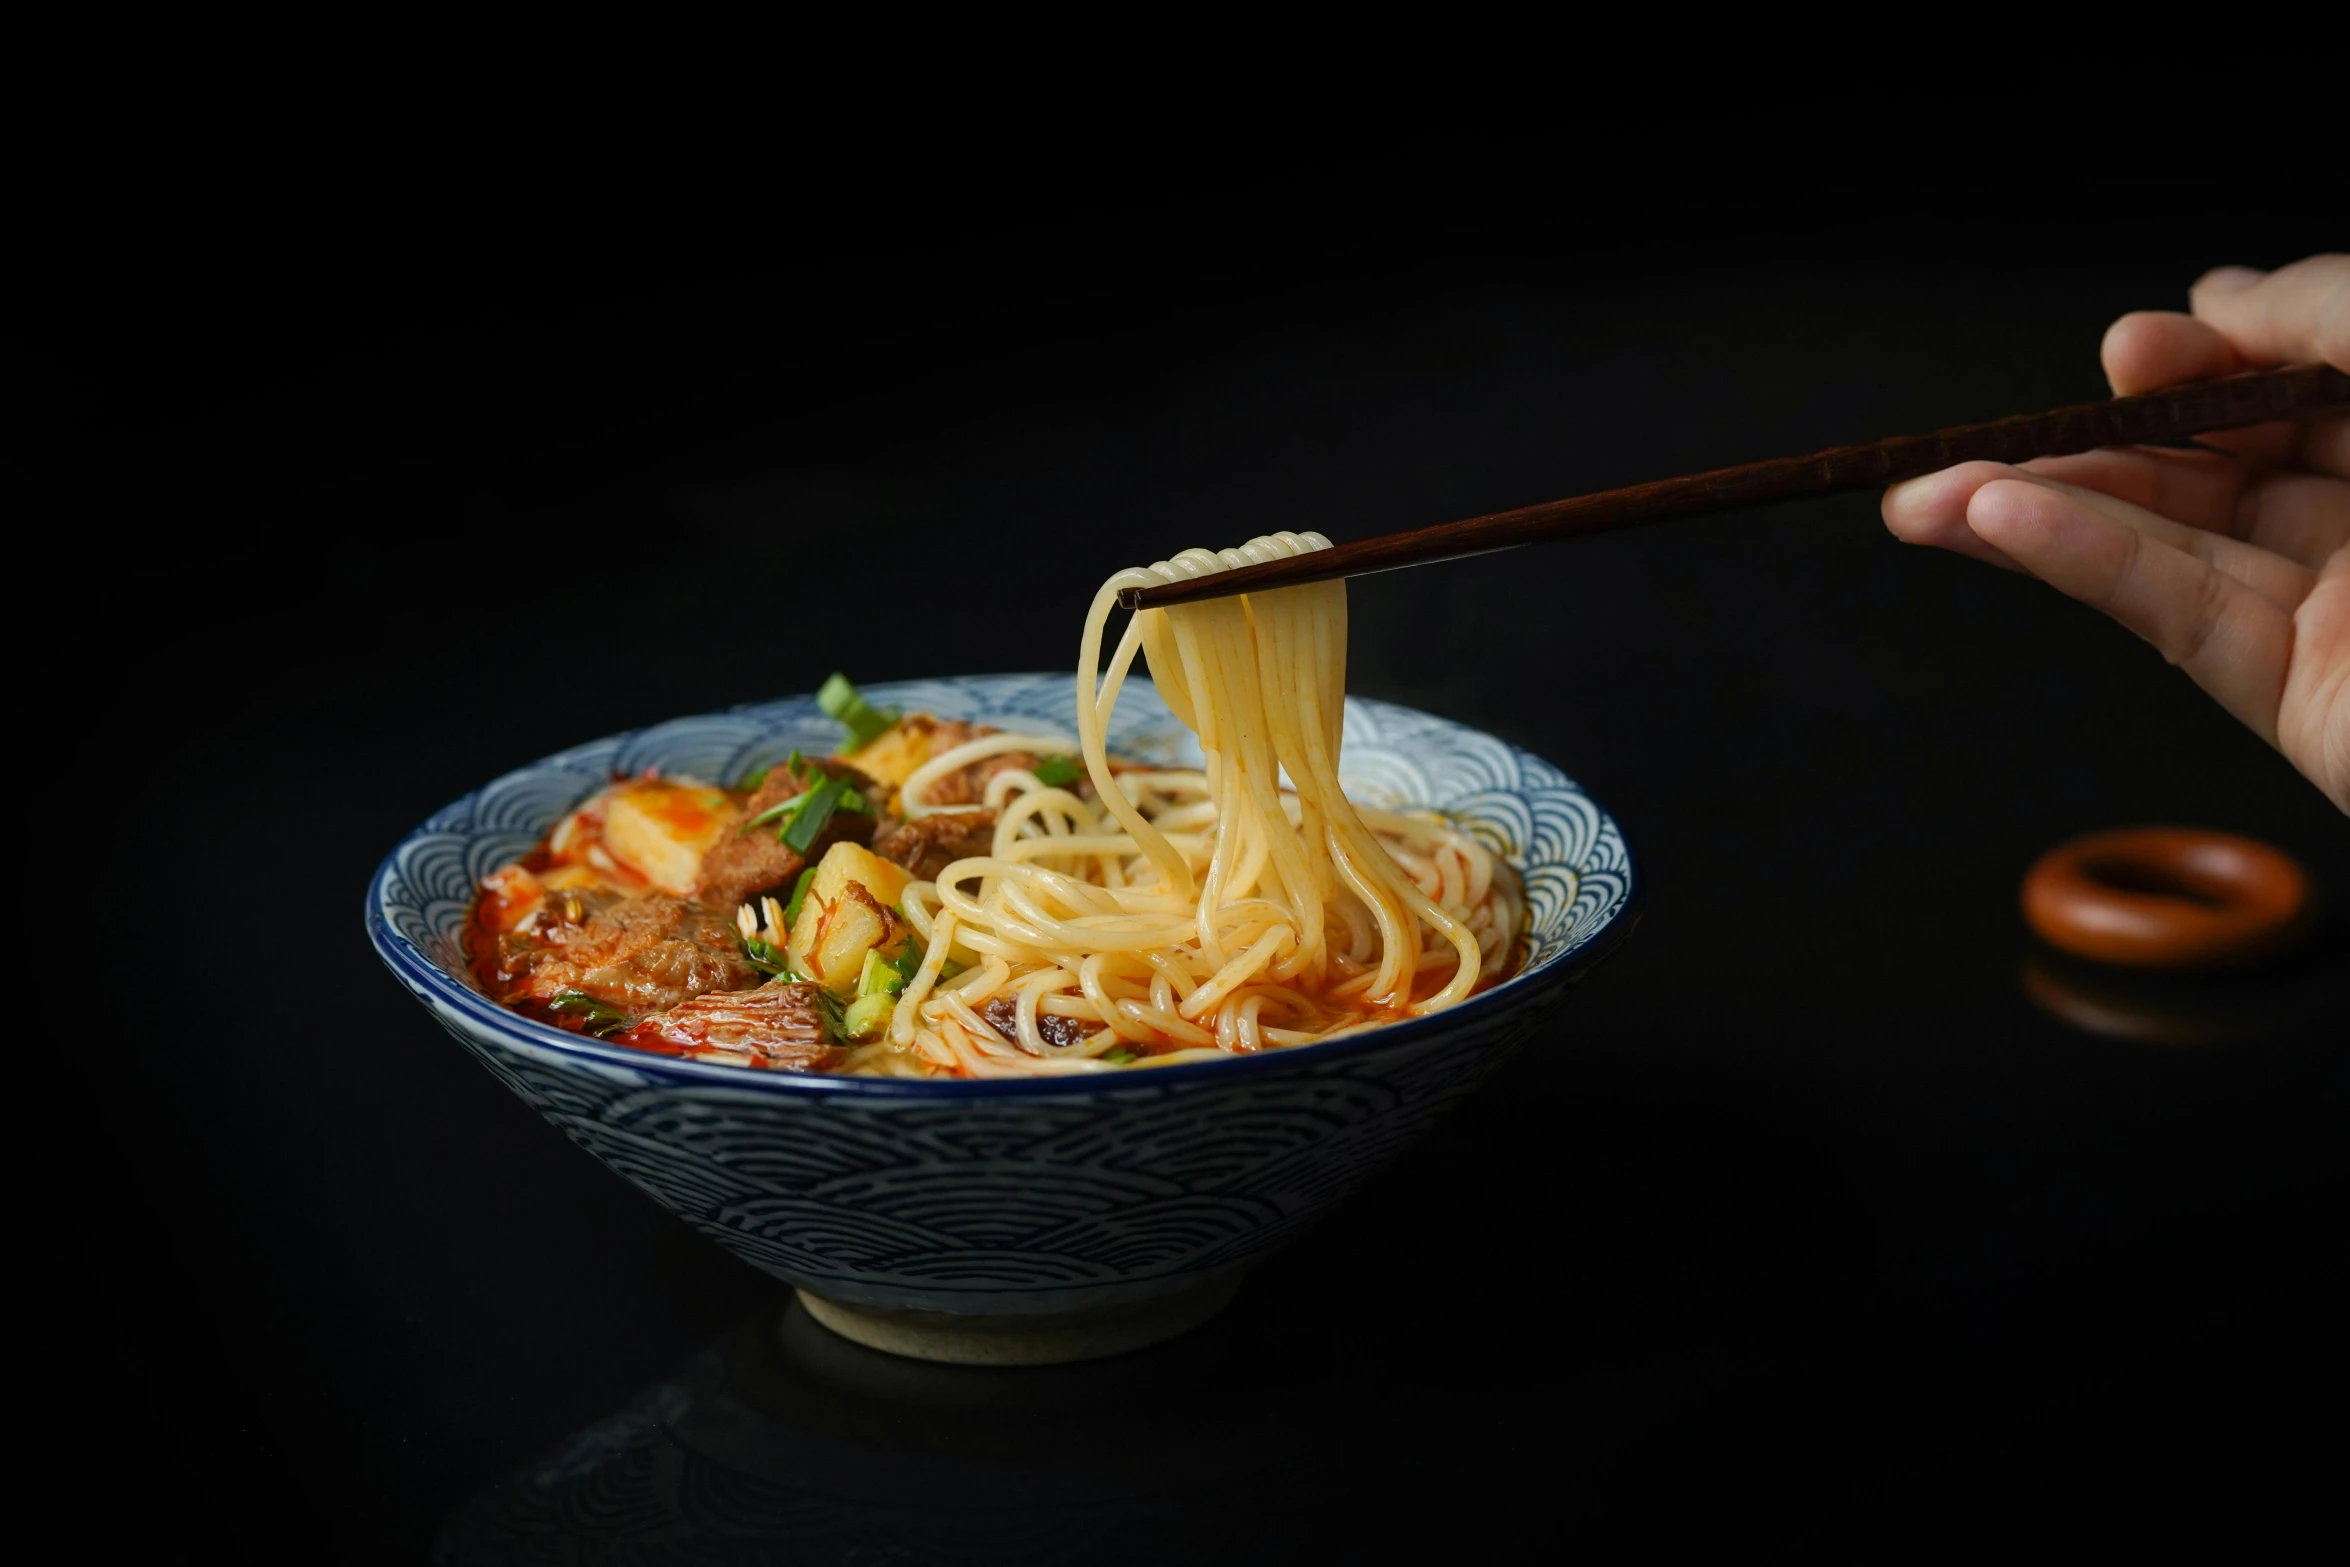 a person holding chopsticks over a bowl of noodles, inspired by Wang Mian, with a black background, ruanjia, plated arm, product introduction photo